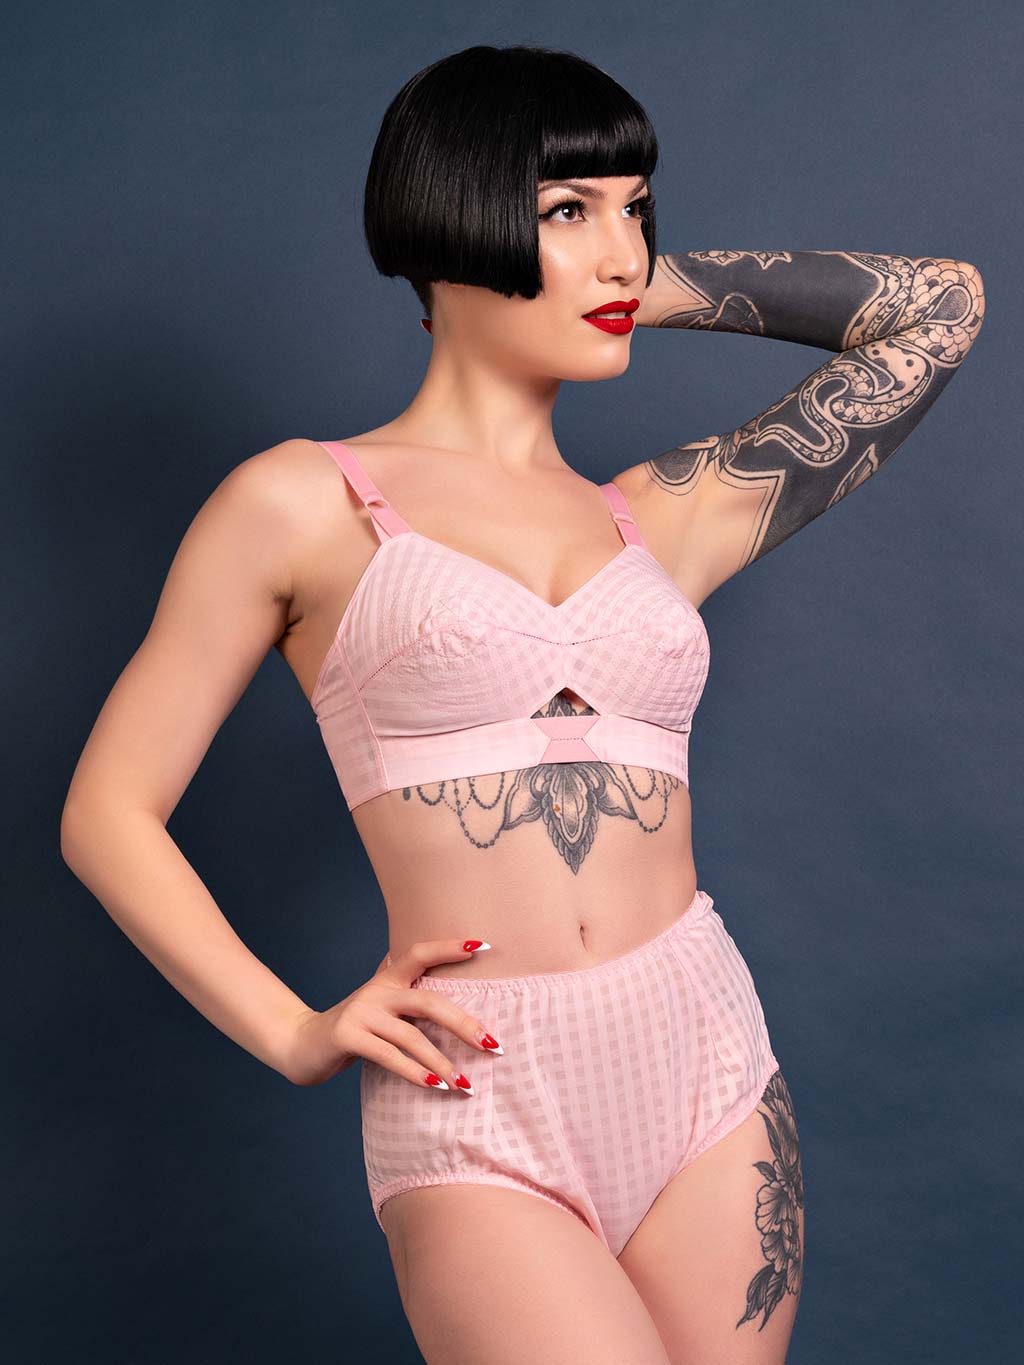 pink gingham lingerie, bullet bra and high waist knickers